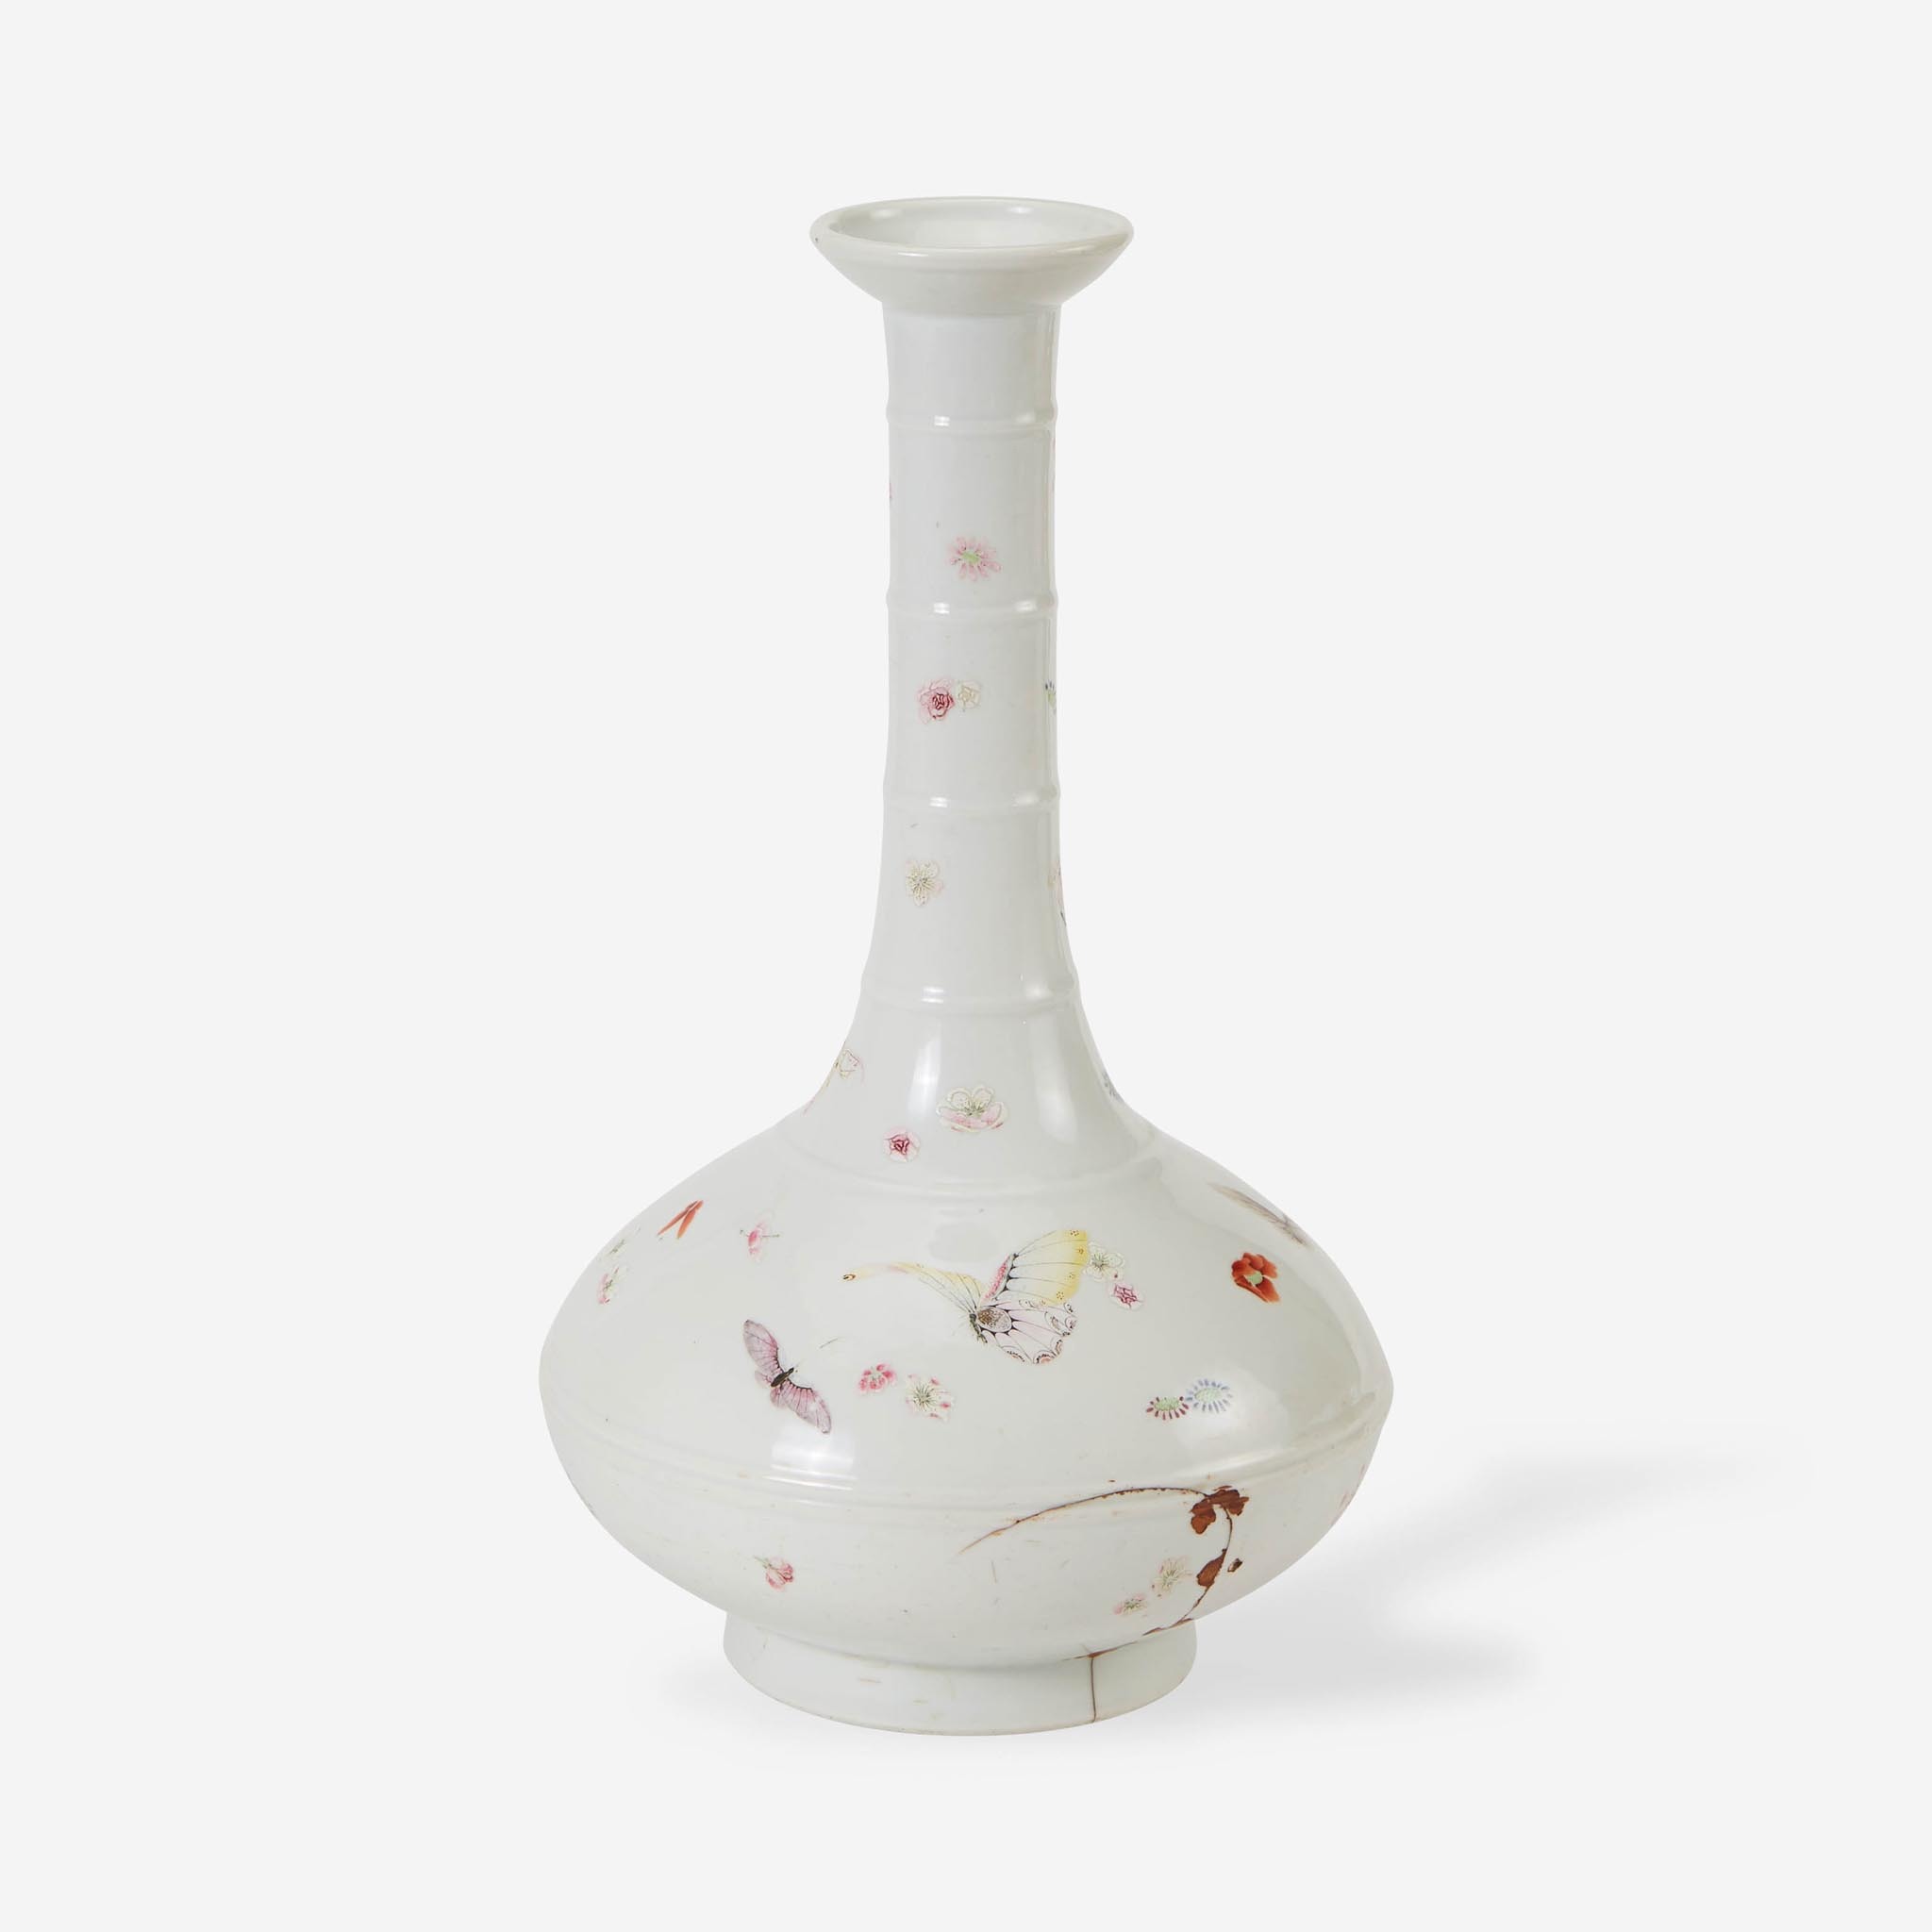 "Butterflies and Blossoms" bottle vase